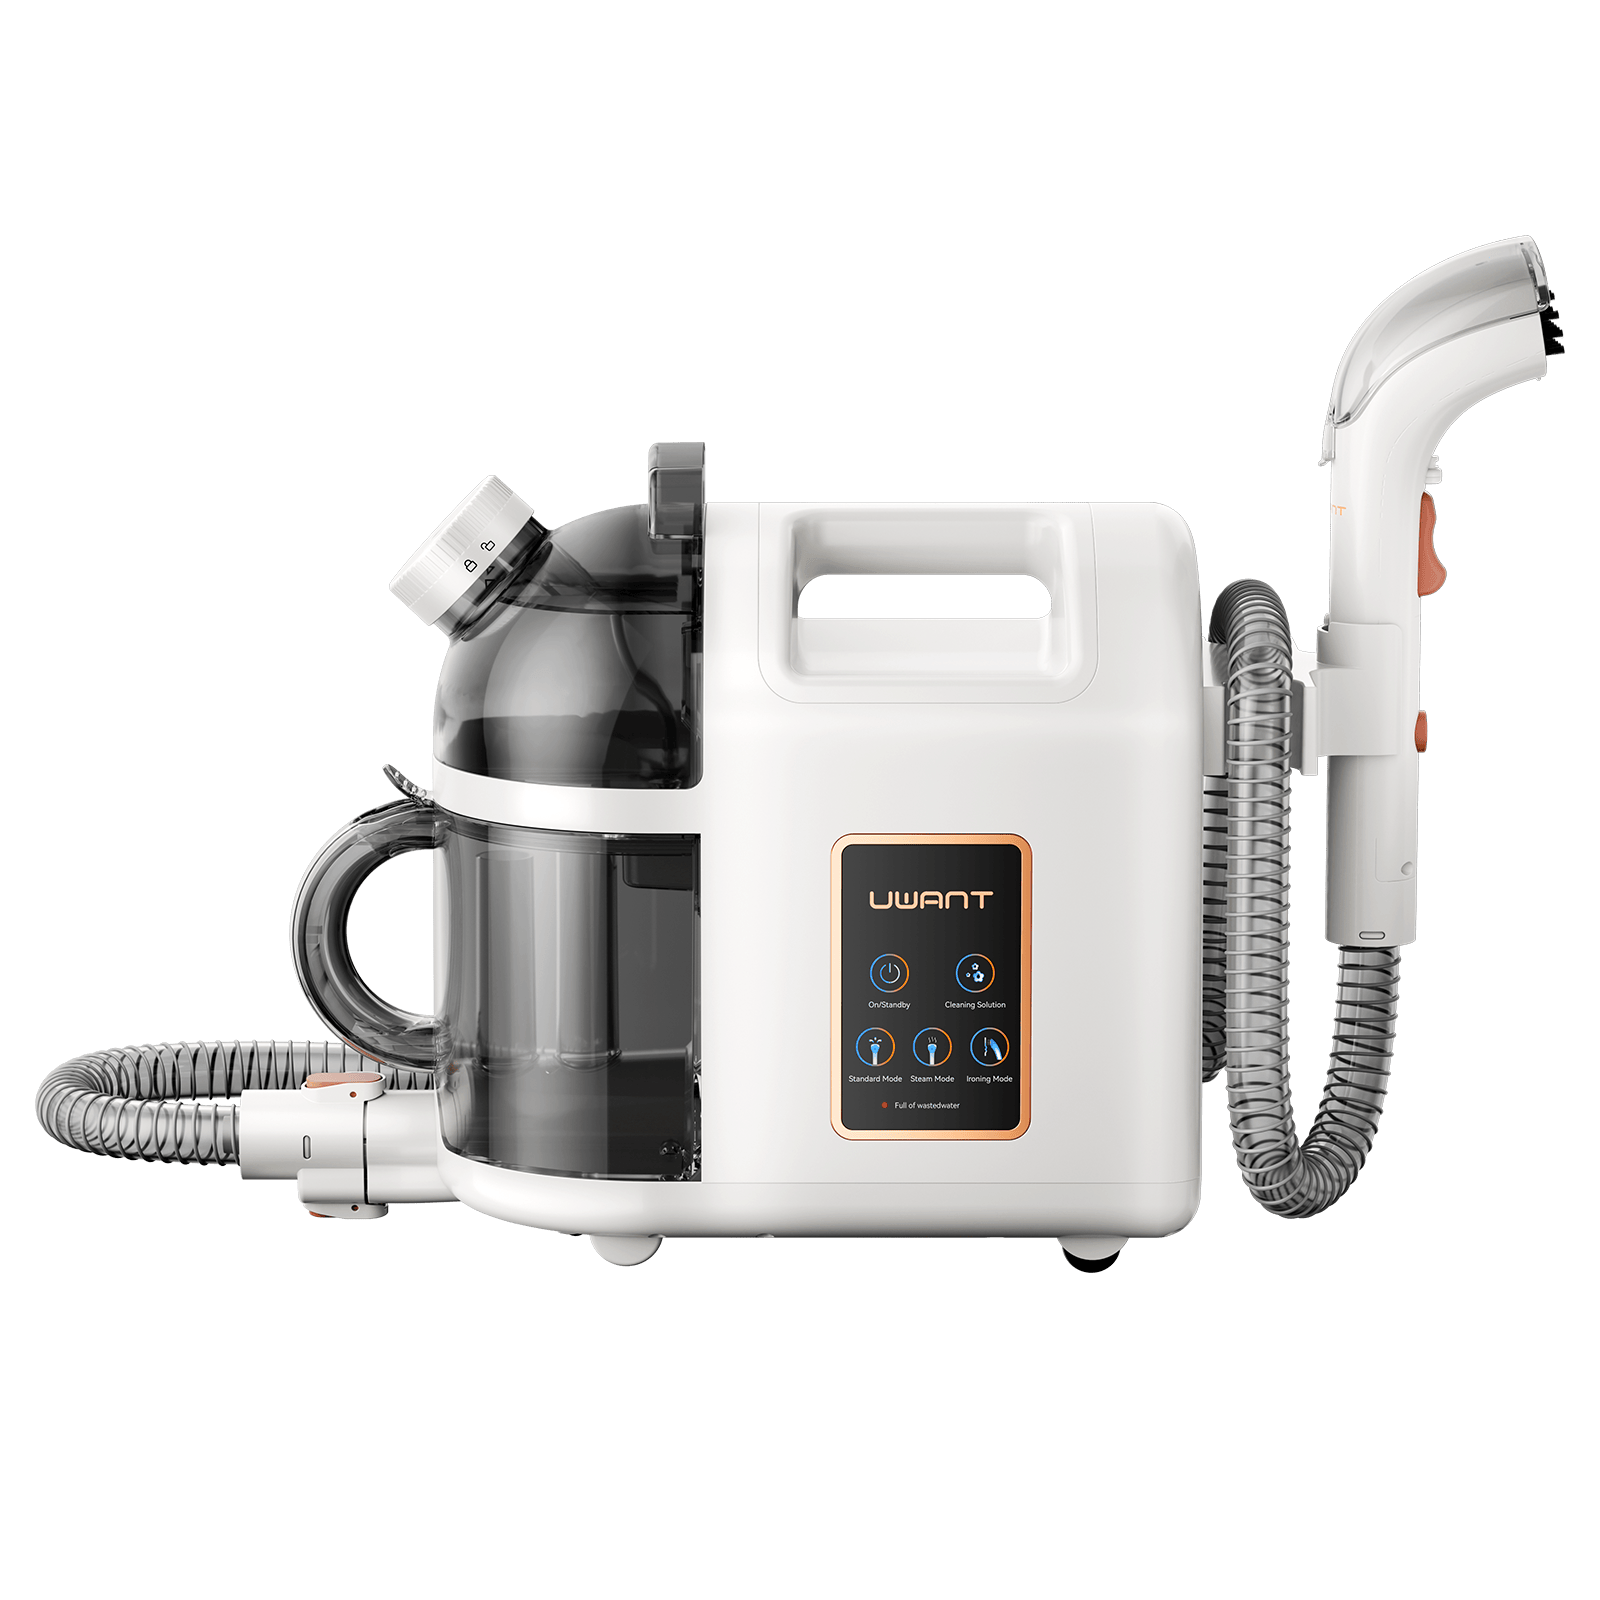 Uwant B200 Vacuum cleaner with steam Mode